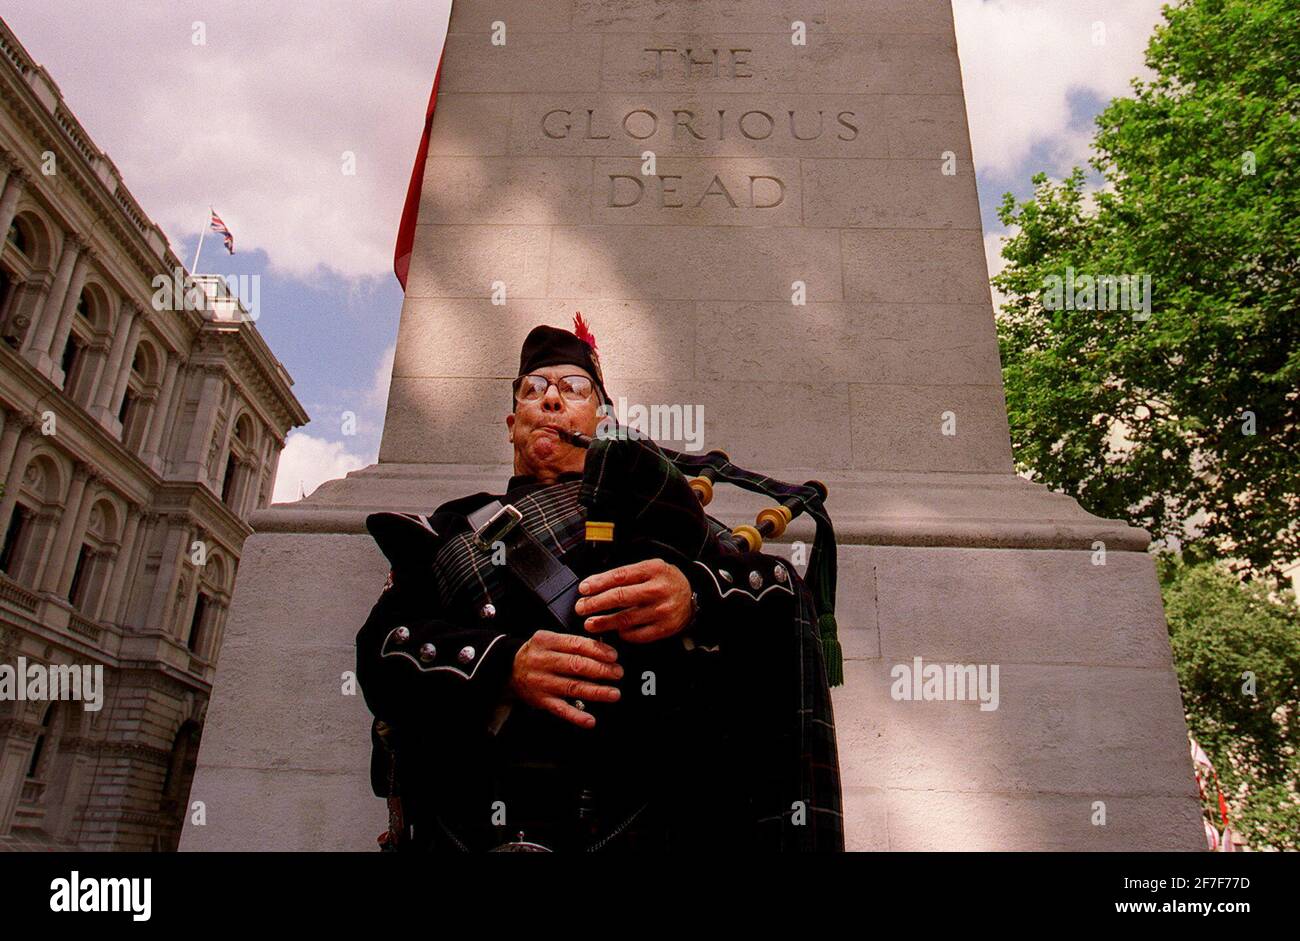 ON THE 55 ANNIVERSARY OF V.J. DAY W.W.2 JAPANESE P.O.W'S HELD A MEMORIAL AT THE CENITAPH (SP) BILL PLENTY WAS THE LONE PIPER. PHOTOGRAPH BY MARK CHILVERS. 15/8/00 Stock Photo